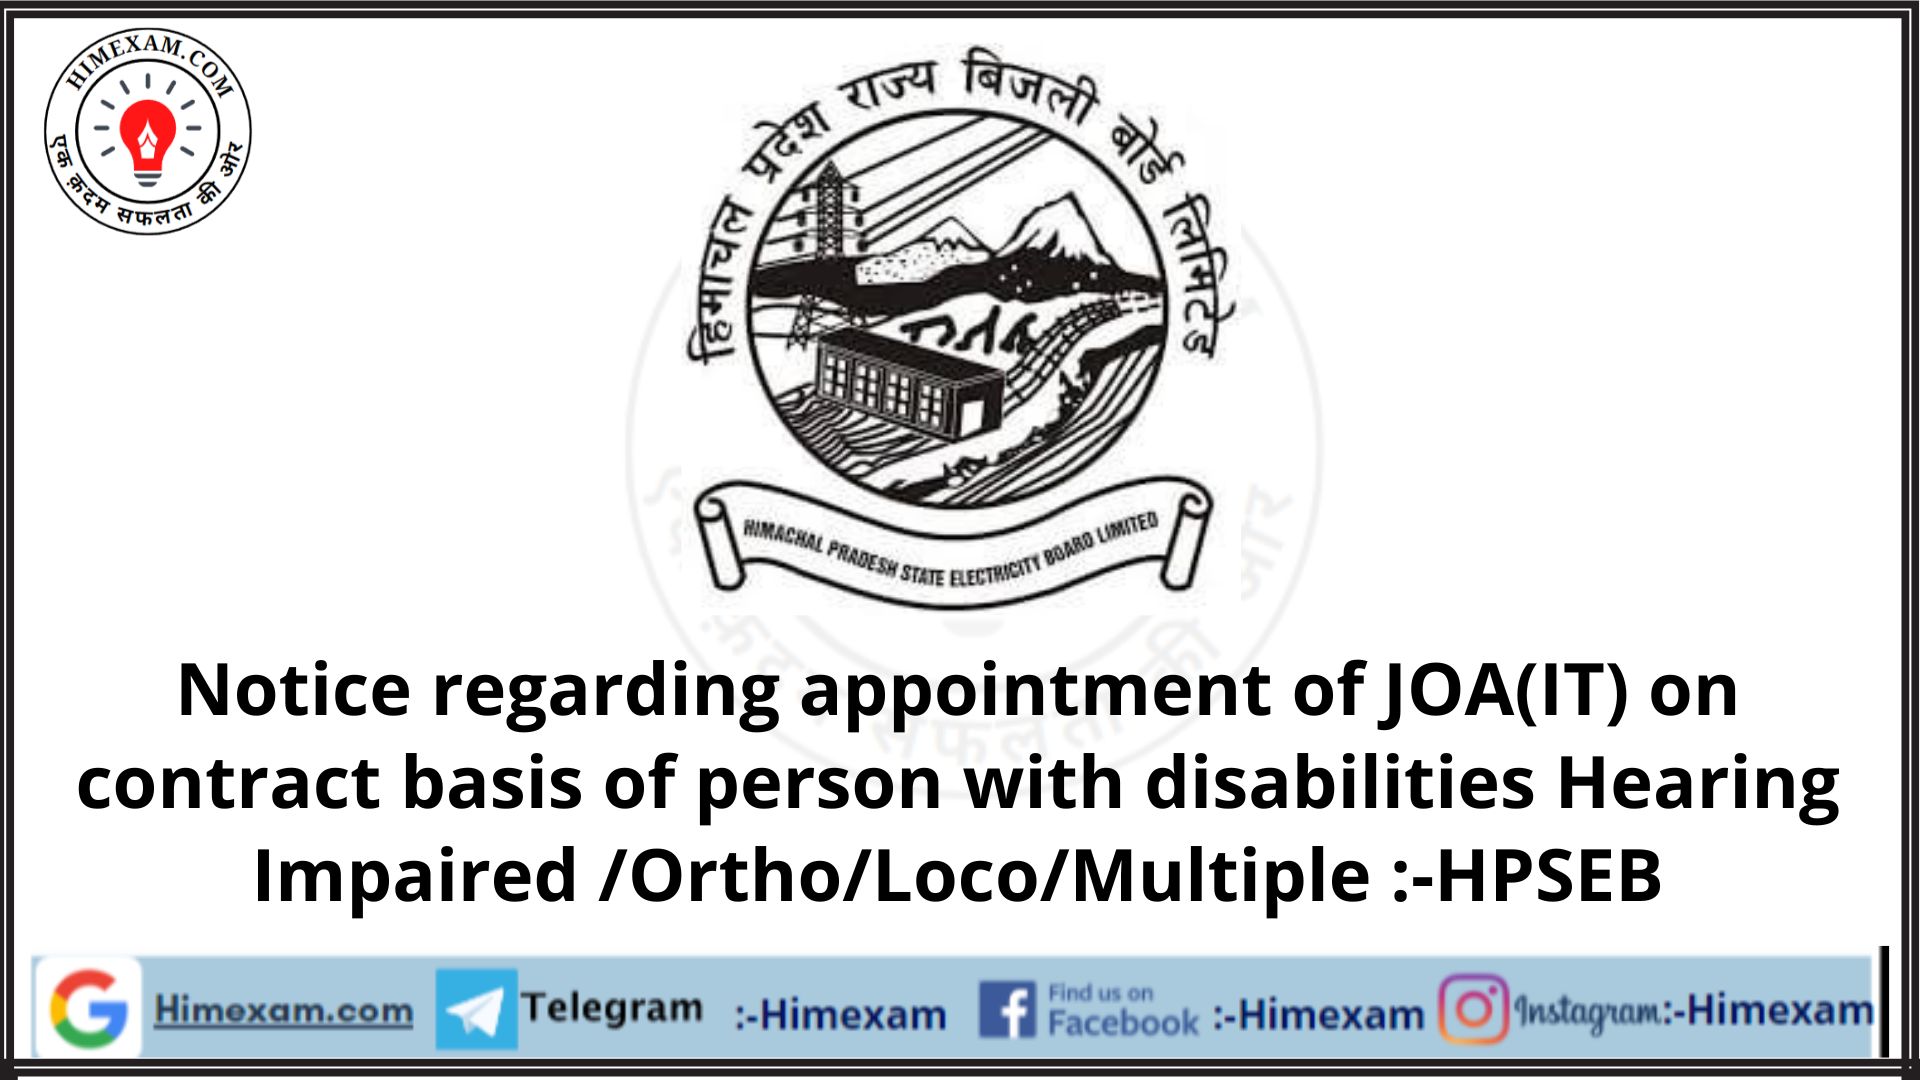 Notice regarding appointment of JOA(IT) on contract basis of person with disabilities Hearing Impaired /Ortho/Loco/Multiple :-HPSEB